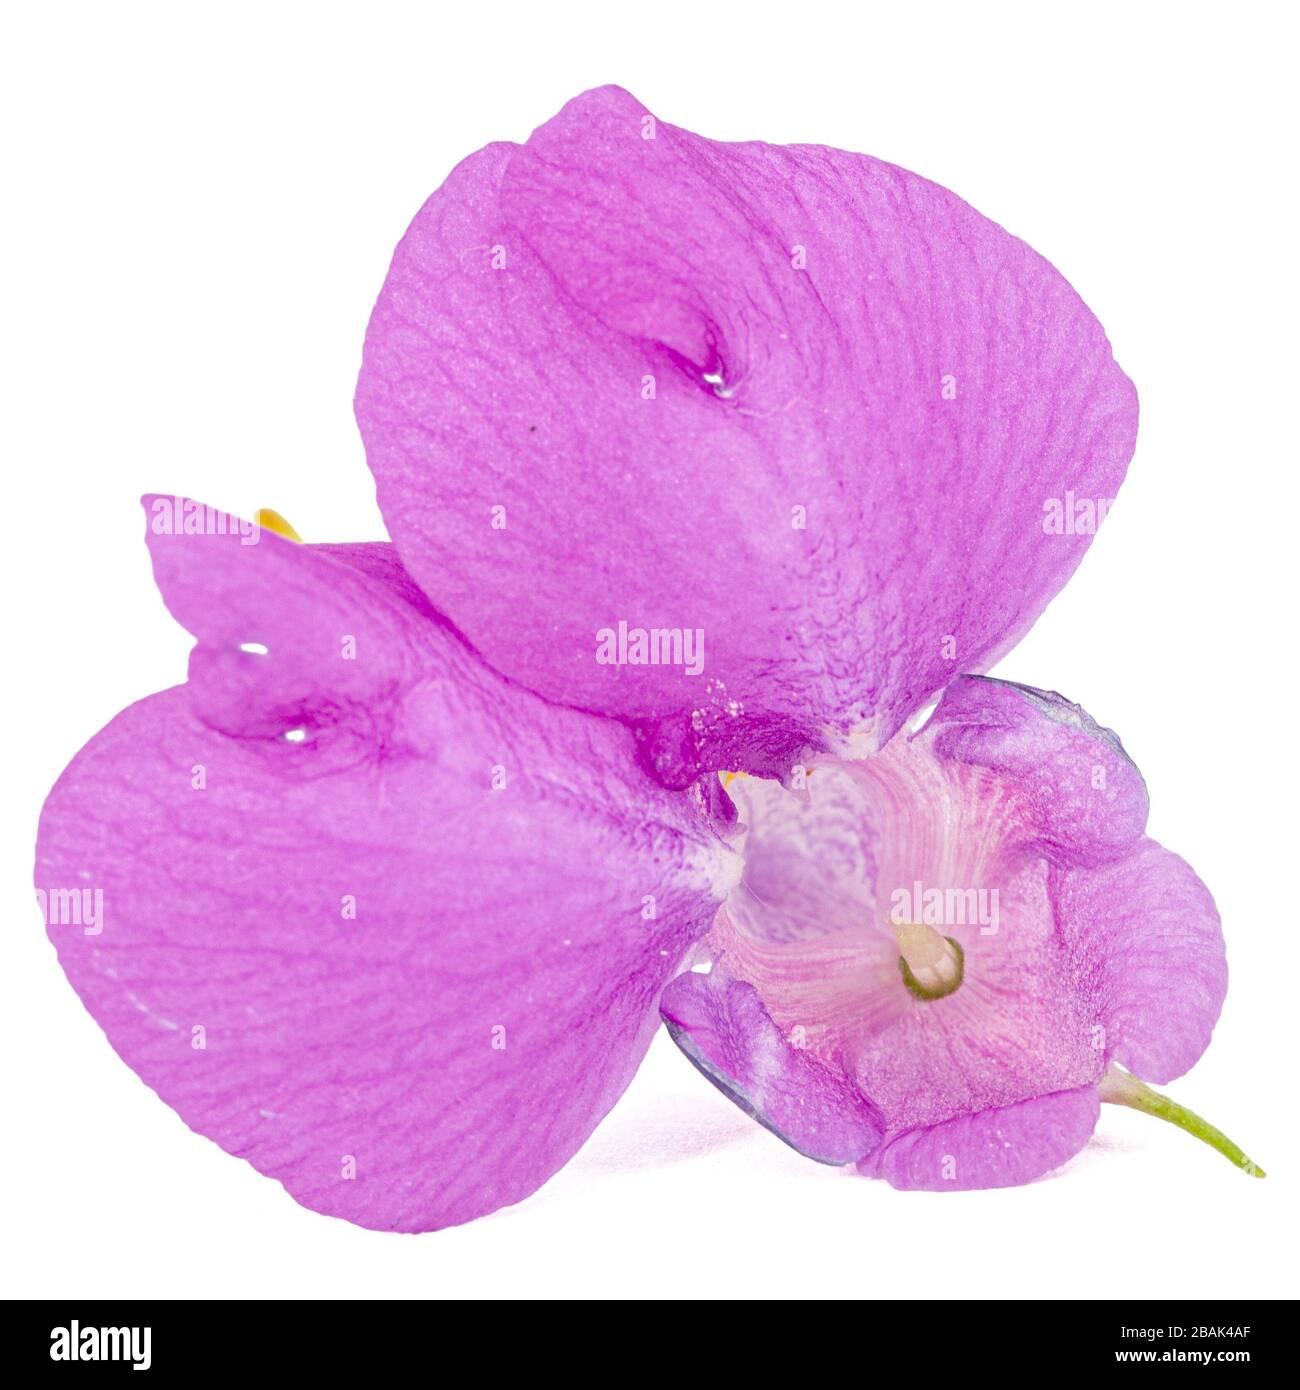 Violet flower of Impatiens balsamina, garden balsam jewelweed touch-me-not plant, isolated on white background Stock Photo